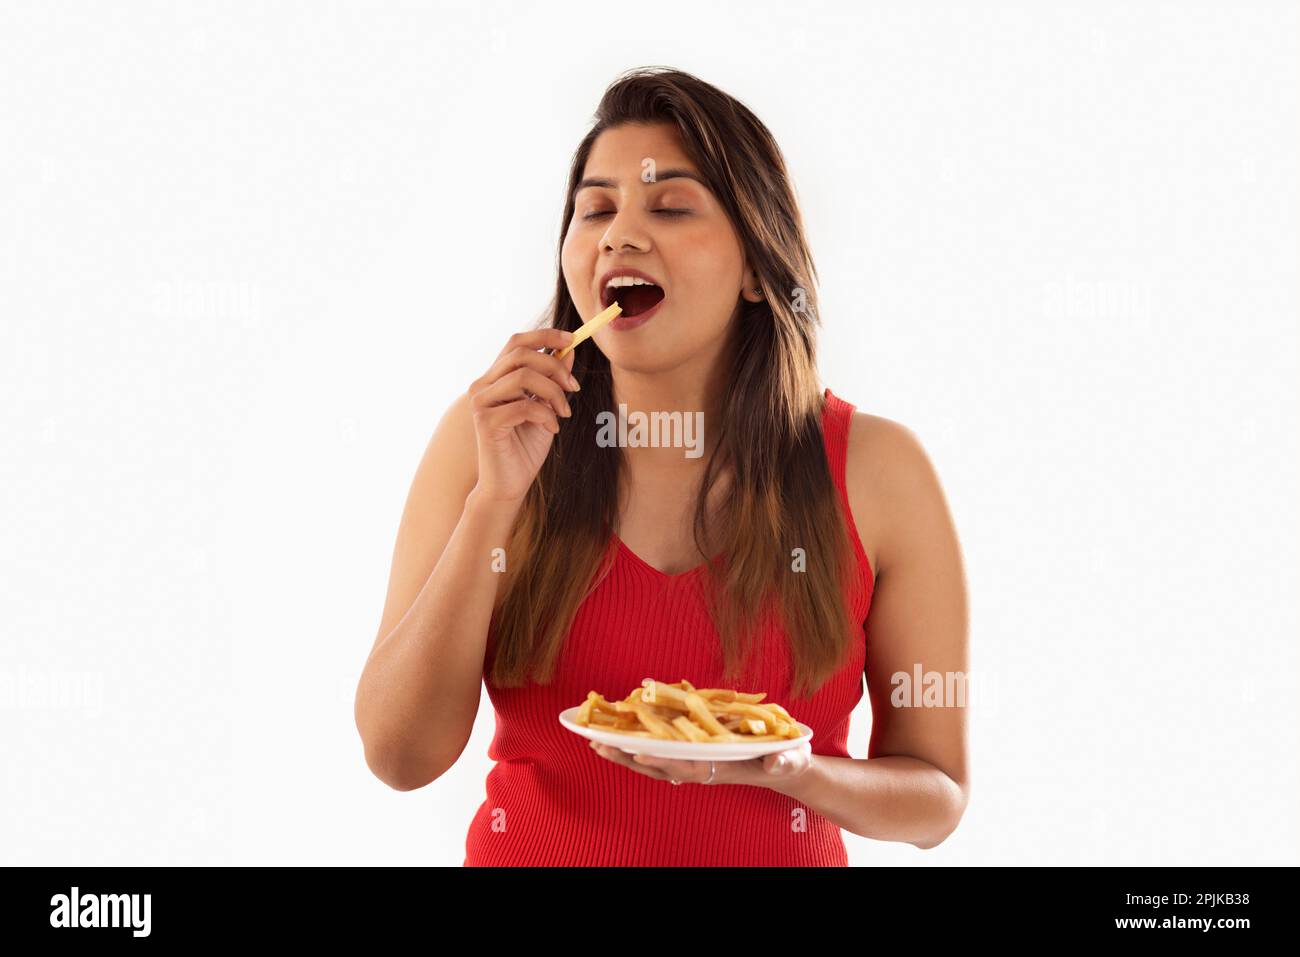 Woman eating french fries against white background Stock Photo